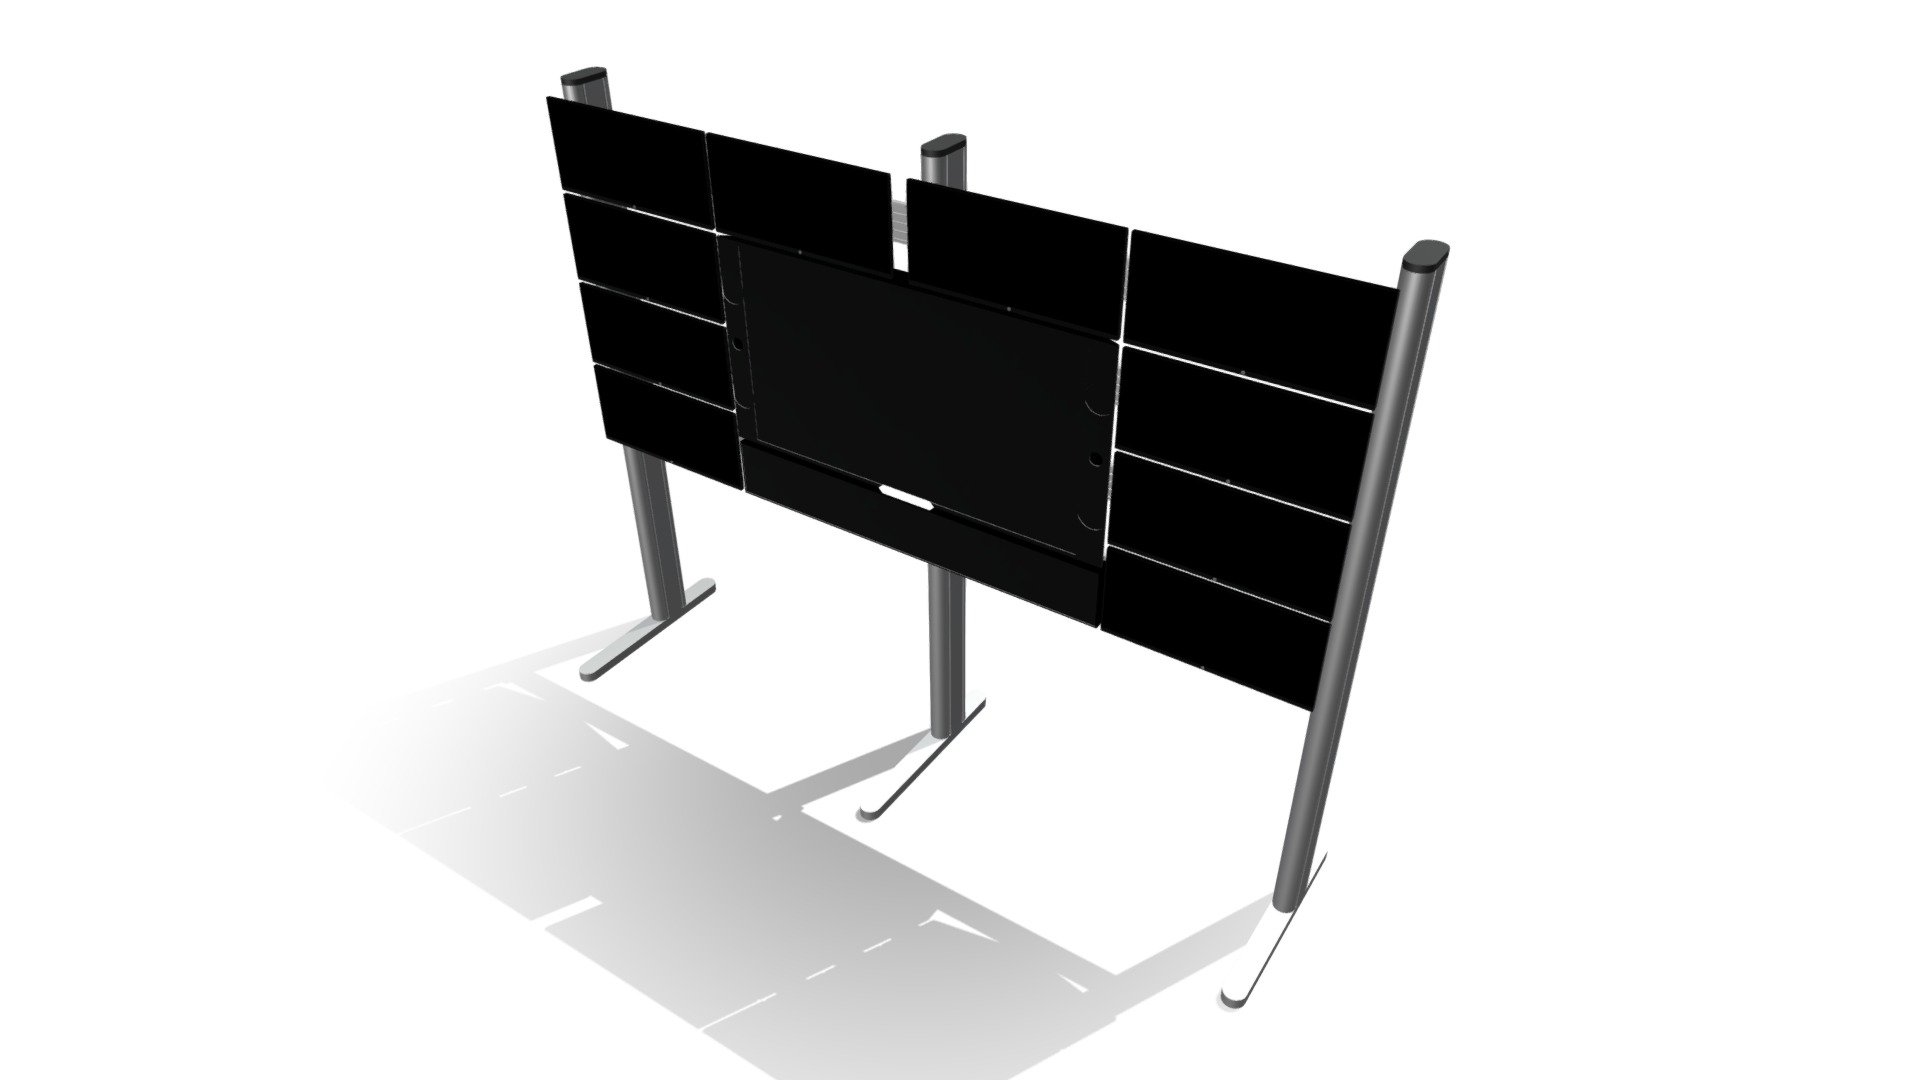 Monitor Stack

For Security &amp; Monitoring Environments, includes Monitors, Stereo Speakers, and LED Time Display 3d model